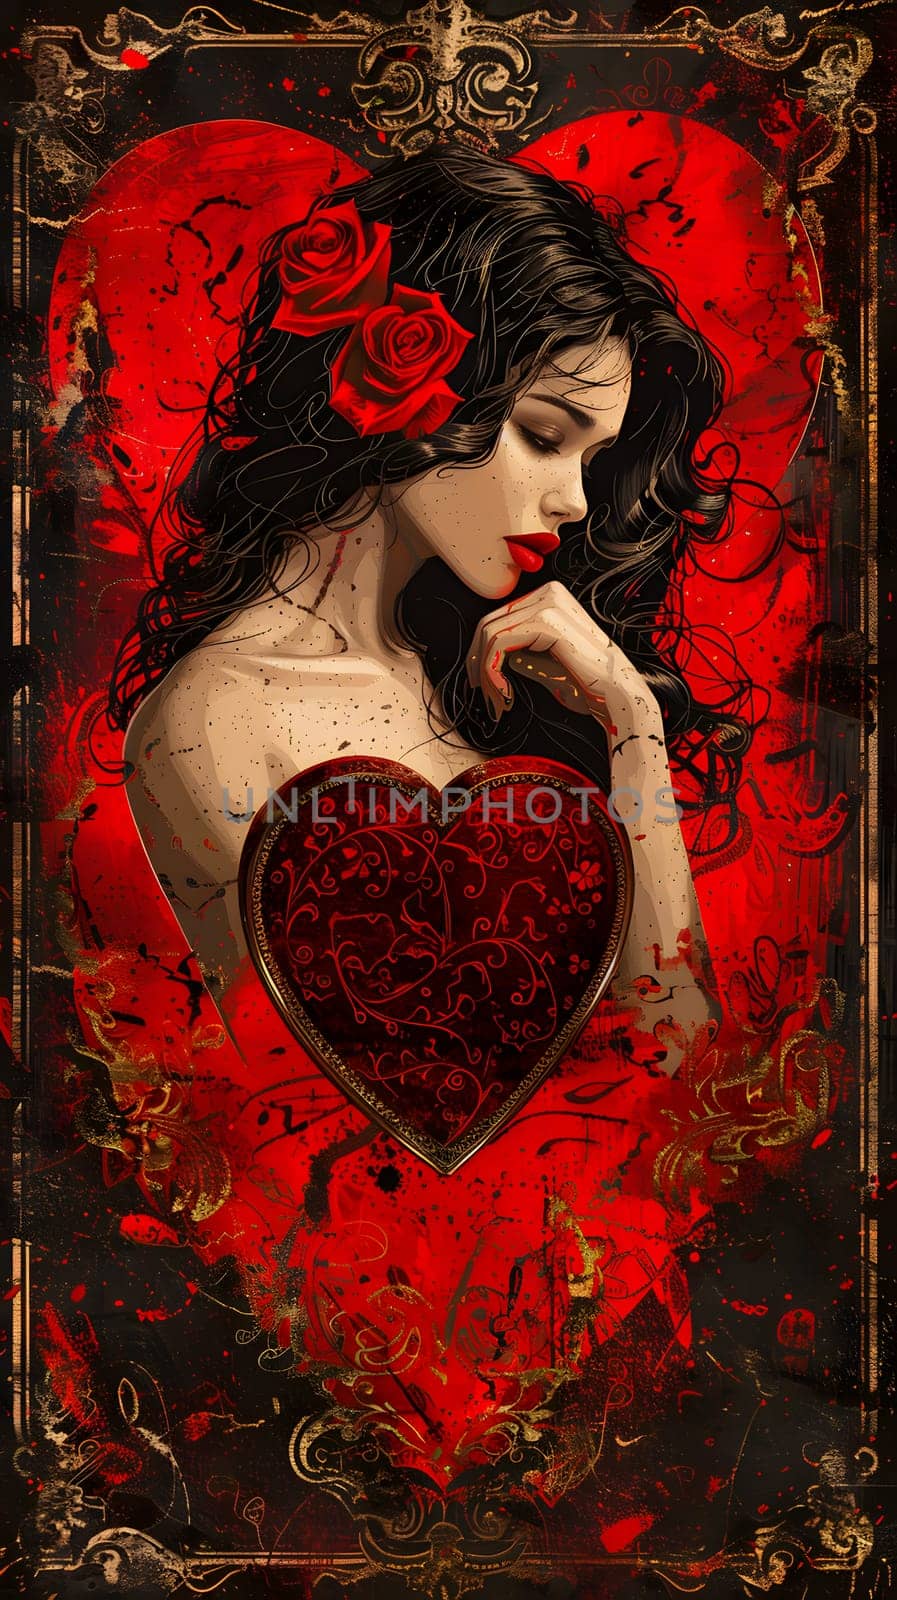 An illustration of a fictional character with roses in her ringlet hair holding a red heart. The visual arts piece combines elements of painting and plant imagery in shades of magenta